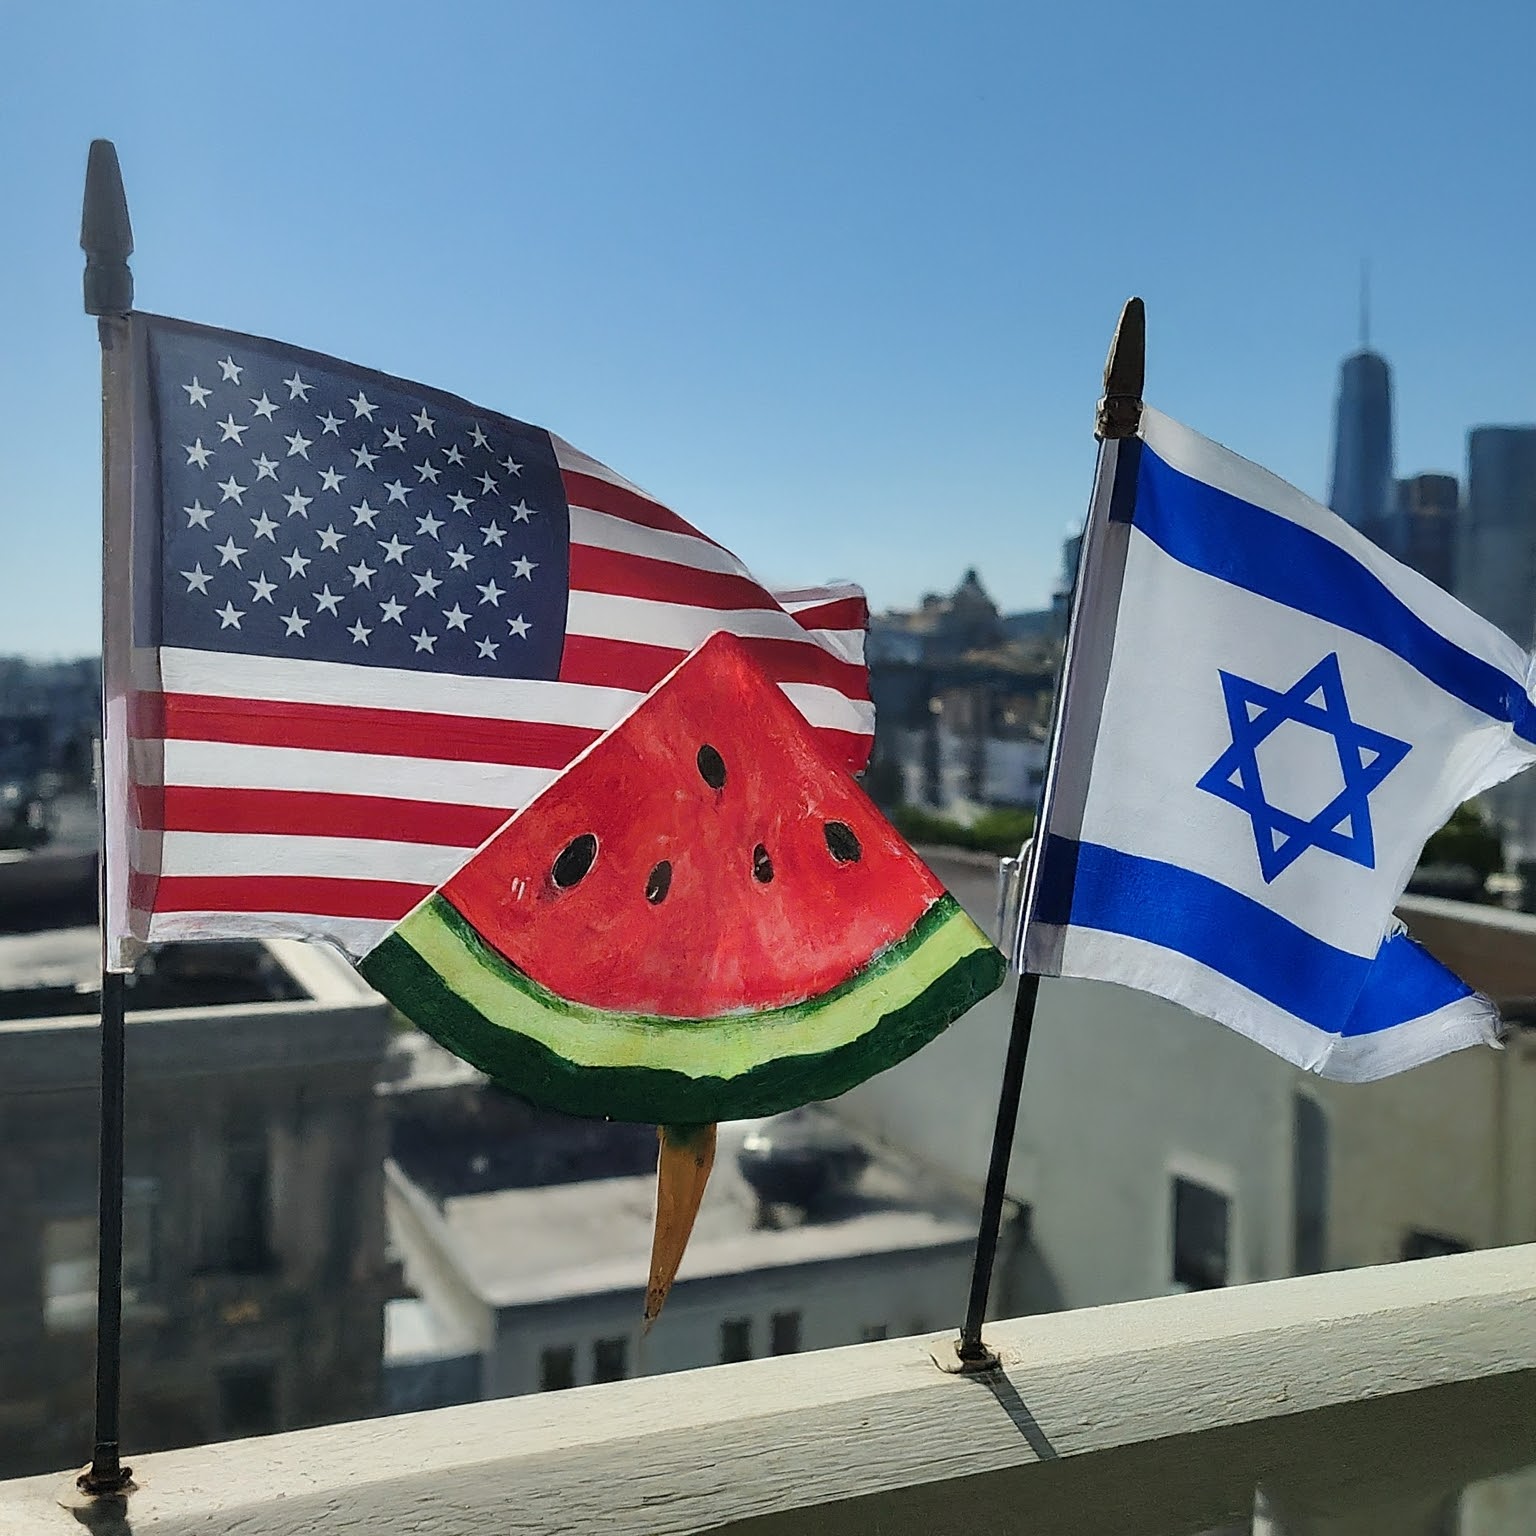 A photo of an American Flag, a painted watermelon slice, and an Israeli Flag